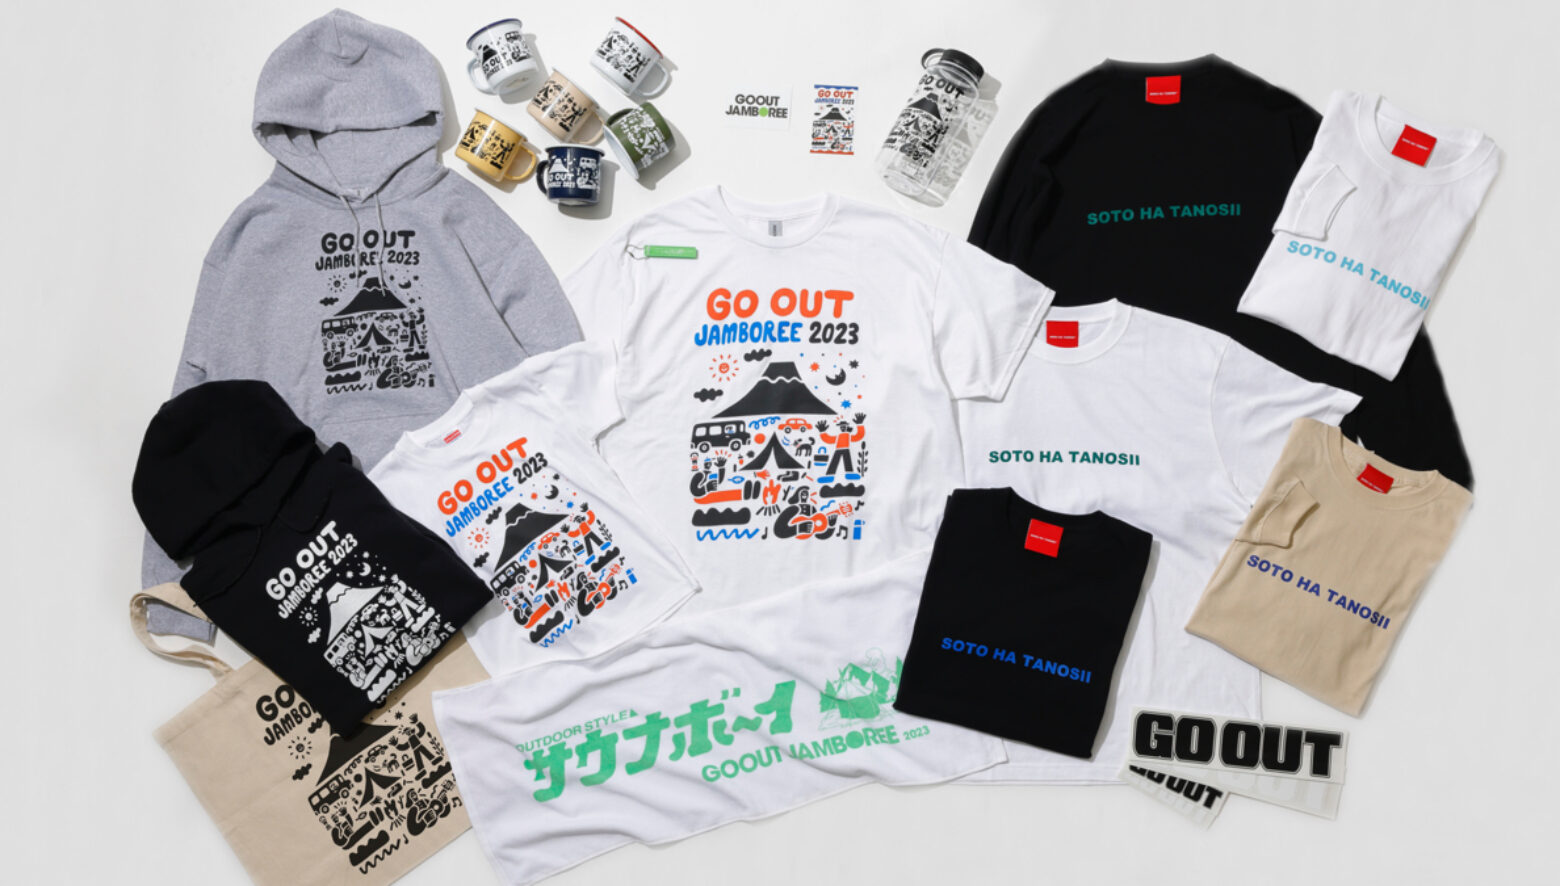 GO OUT JAMBOREE 2023が間もなく開催！ 今回はGO OUT Online 